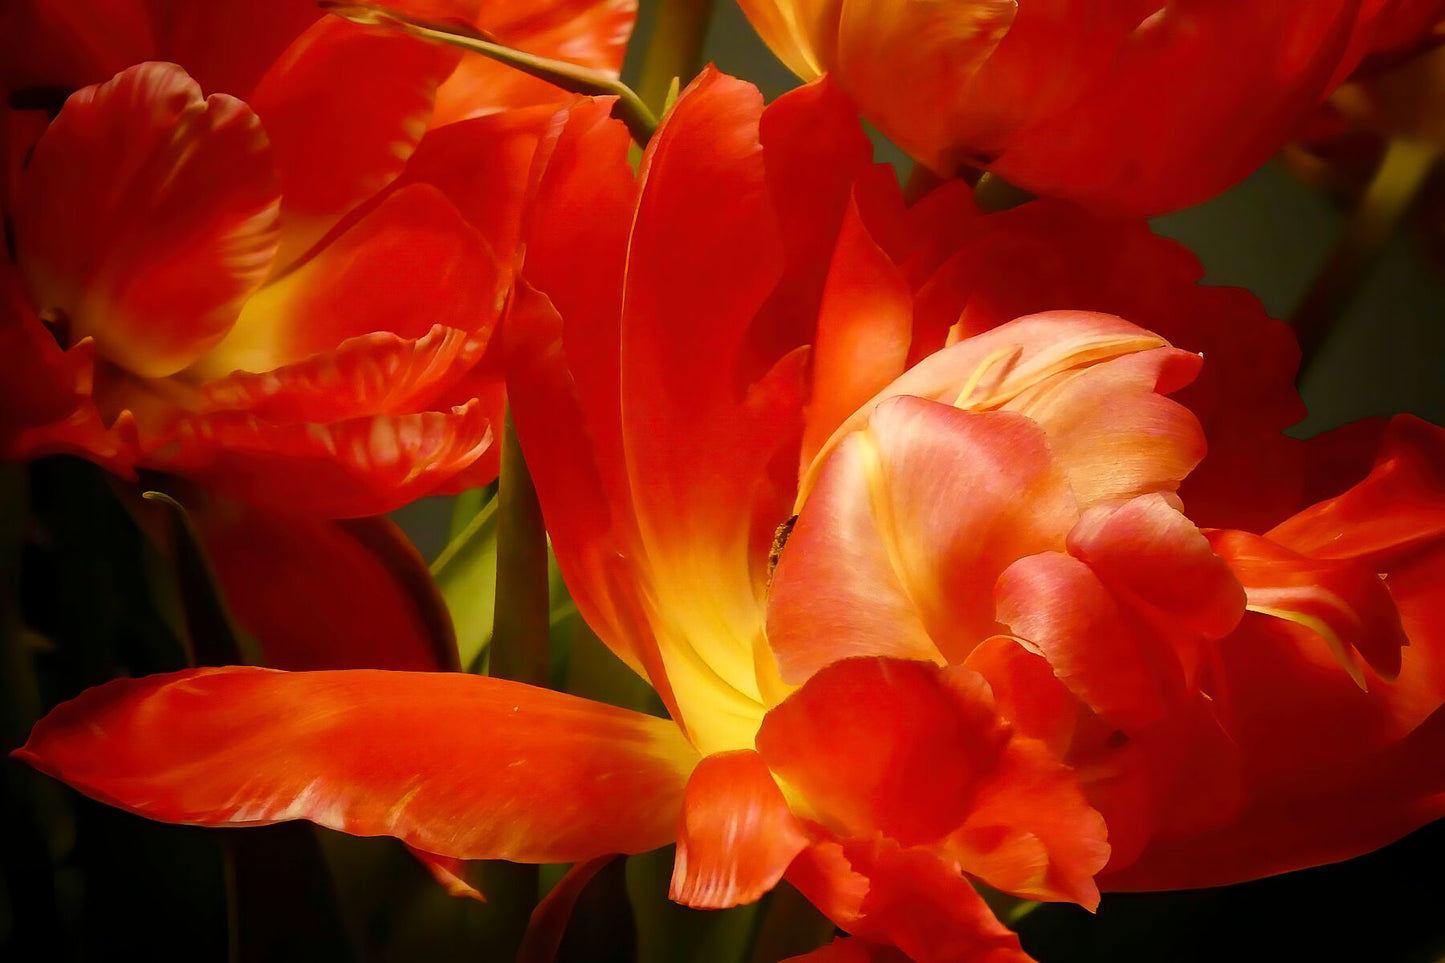 Red Parrot Tulips close up IV